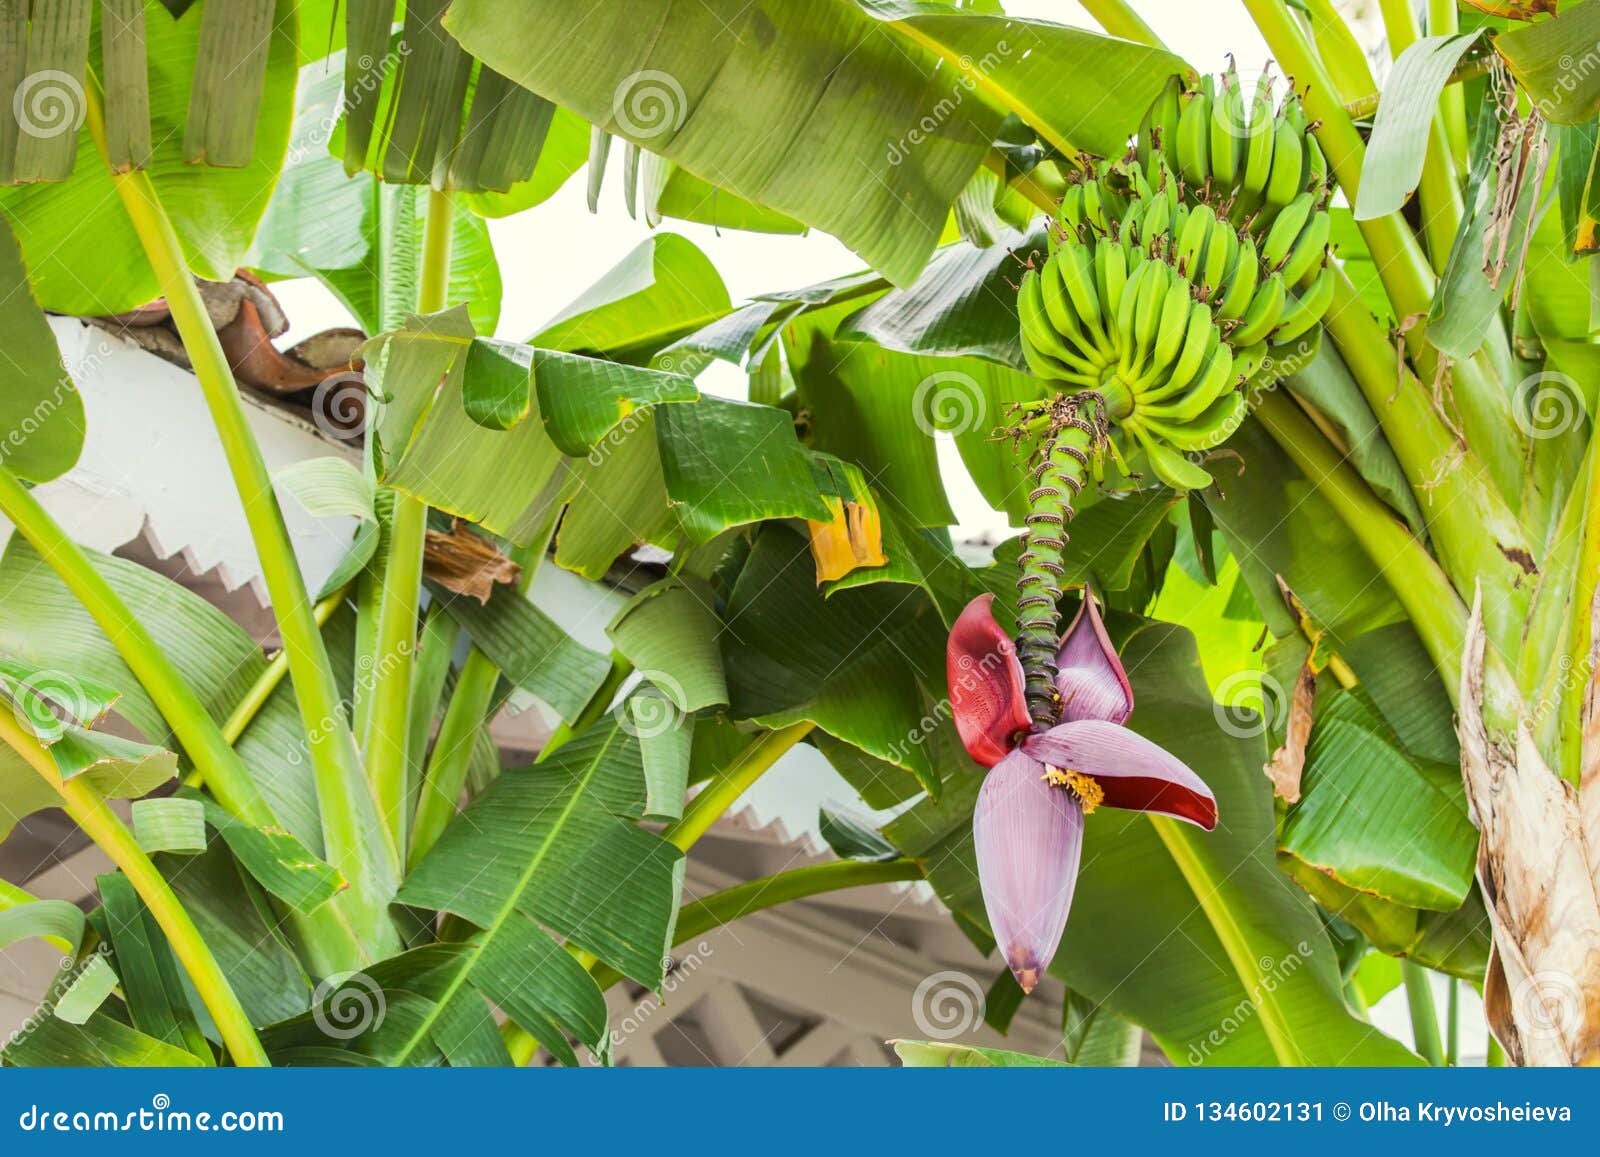 Banana Flower And Bunch Of Bananas Red Banana Blossom On A Banana Tree Banana Plant With Fruit And Flower Stock Image Image Of Hanging Green 134602131,10th Anniversary Gifts For Him